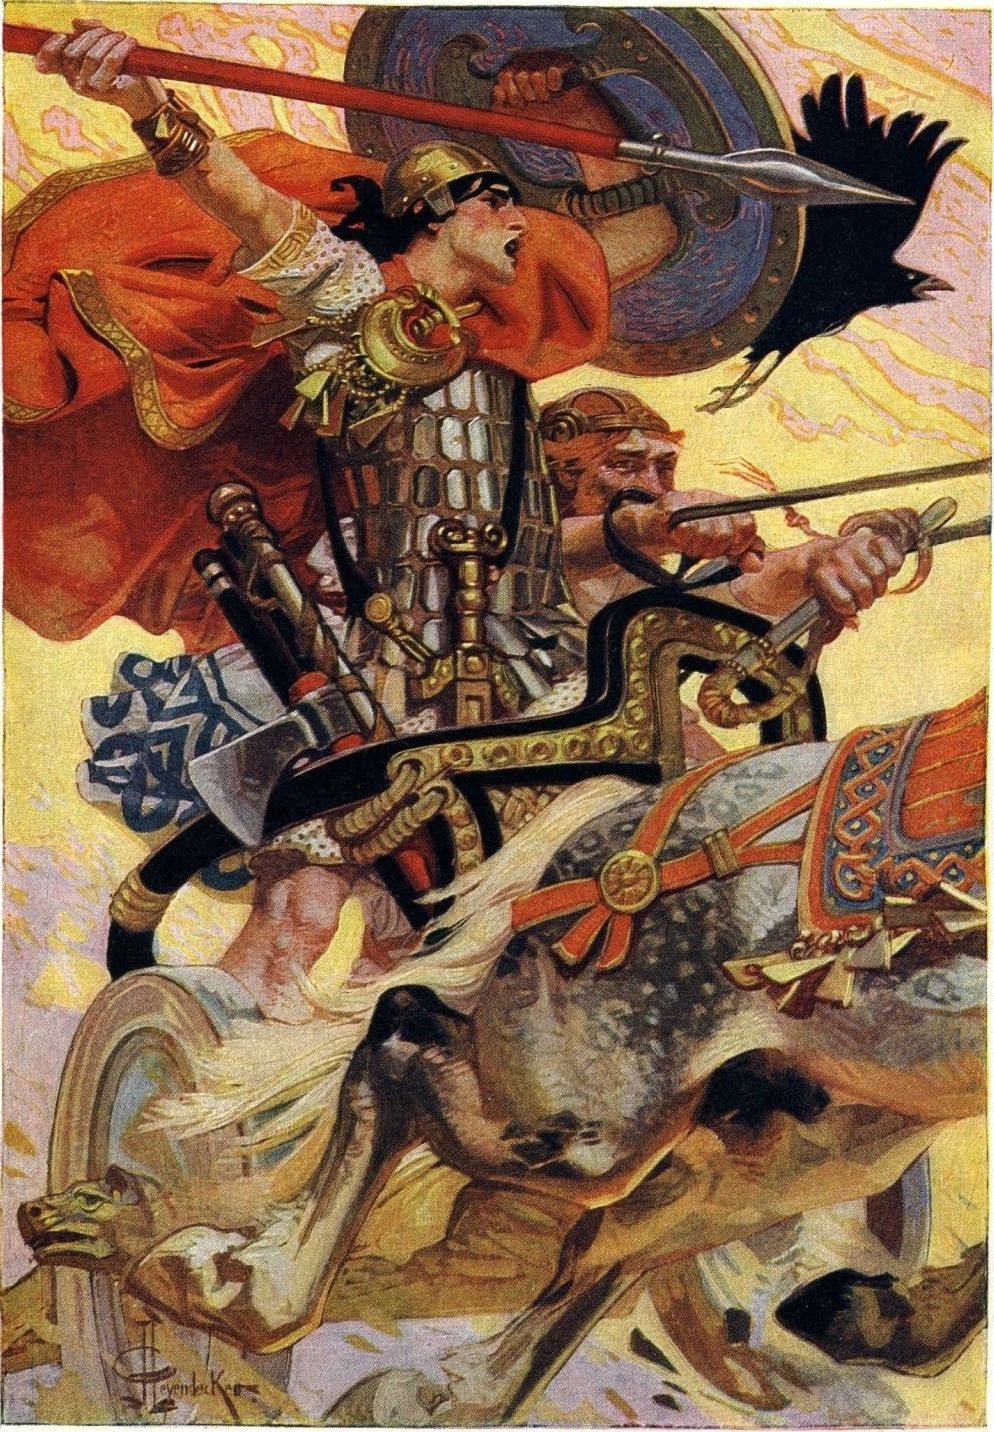 An illustration of a battle scene with a Celtic soldier on a horse. The soldier is wearing a red cape and a helmet with a red plume. The horse is white and is rearing up on its hind legs. The soldier is holding a shield and a spear. The background is a mix of orange and yellow, with a hint of pink.